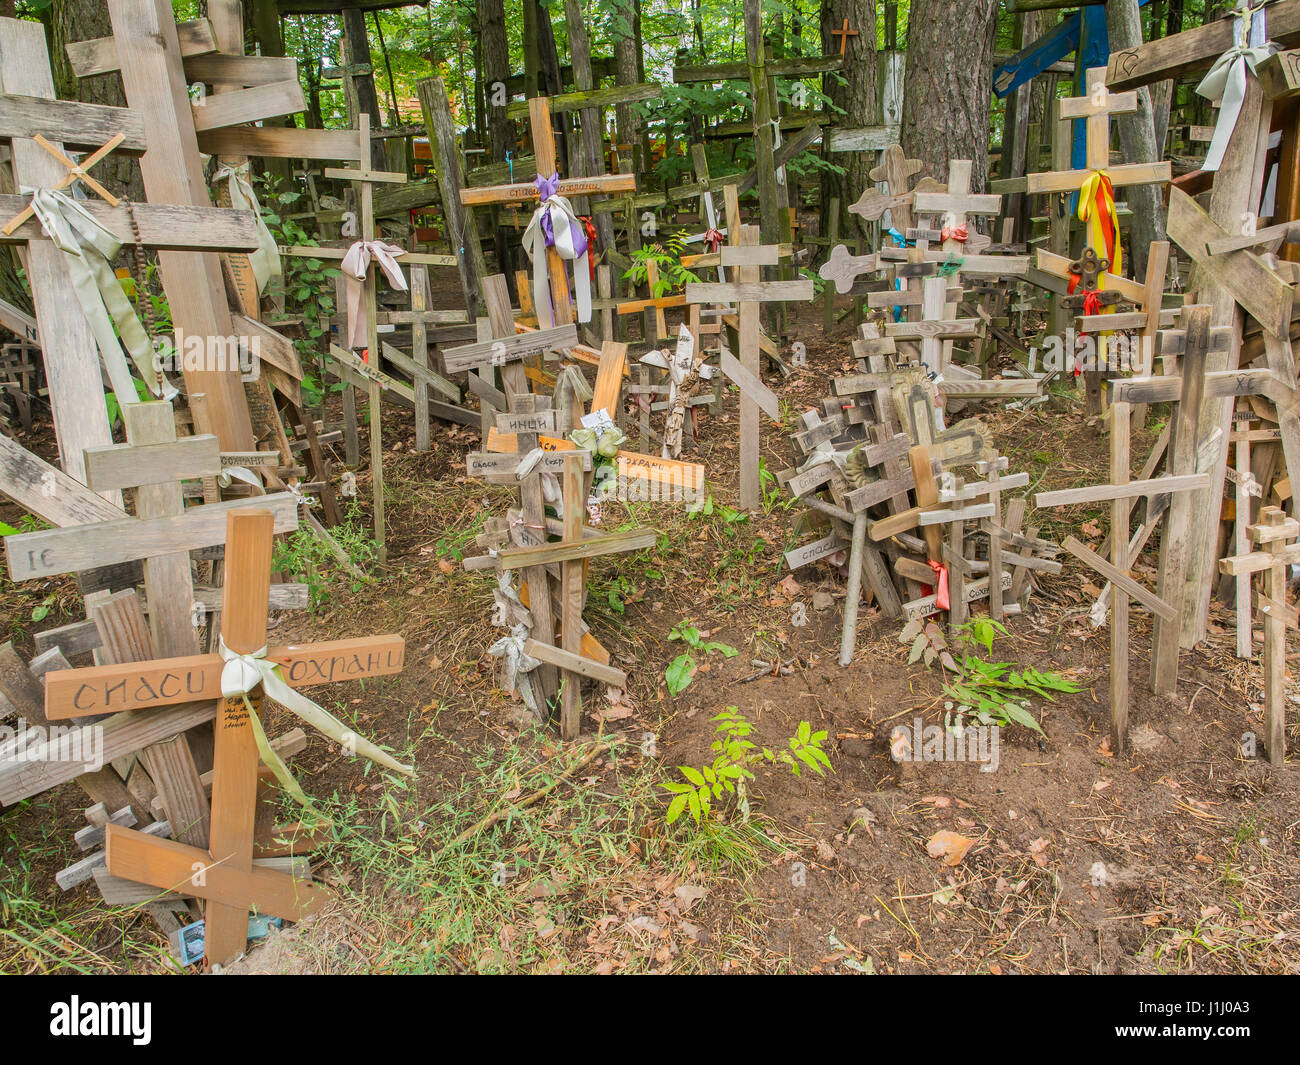 Grabarka, Poland - August 14, 2016: Holly crosses brought by pilgrims to the Holy Mount Grabarka. Stock Photo